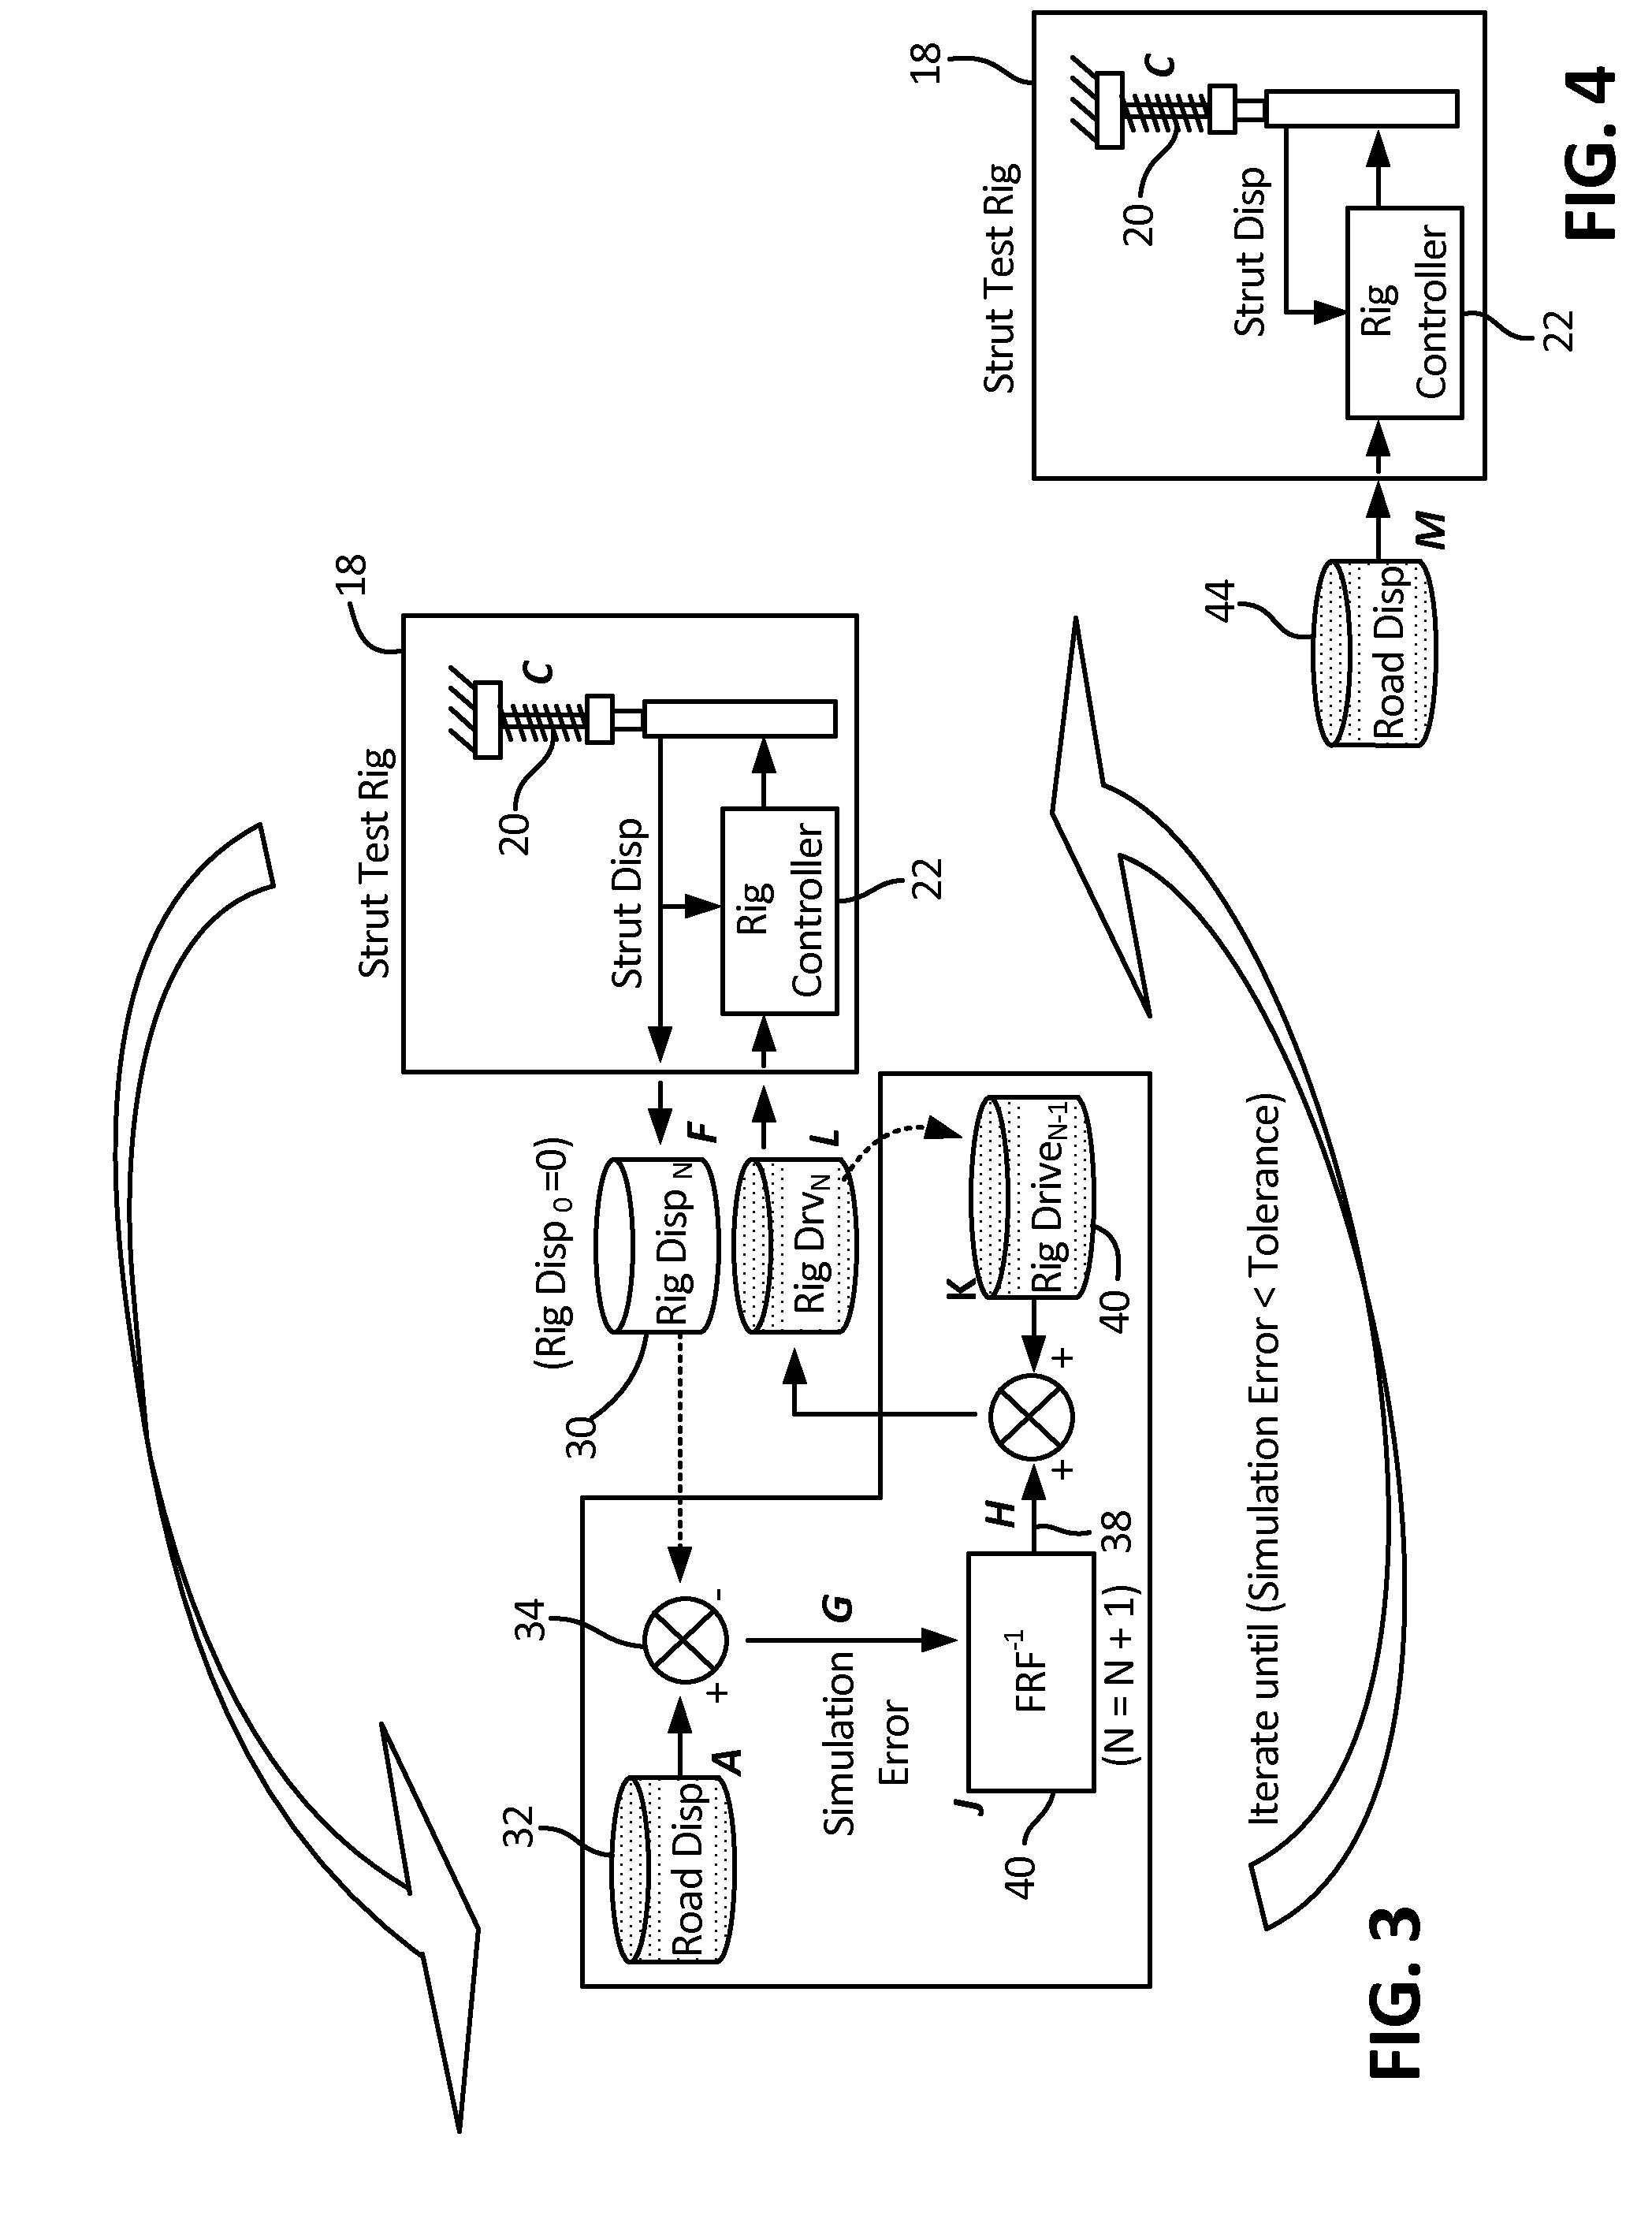 Method and systems for off-line control for simulation of coupled hybrid dynamic systems